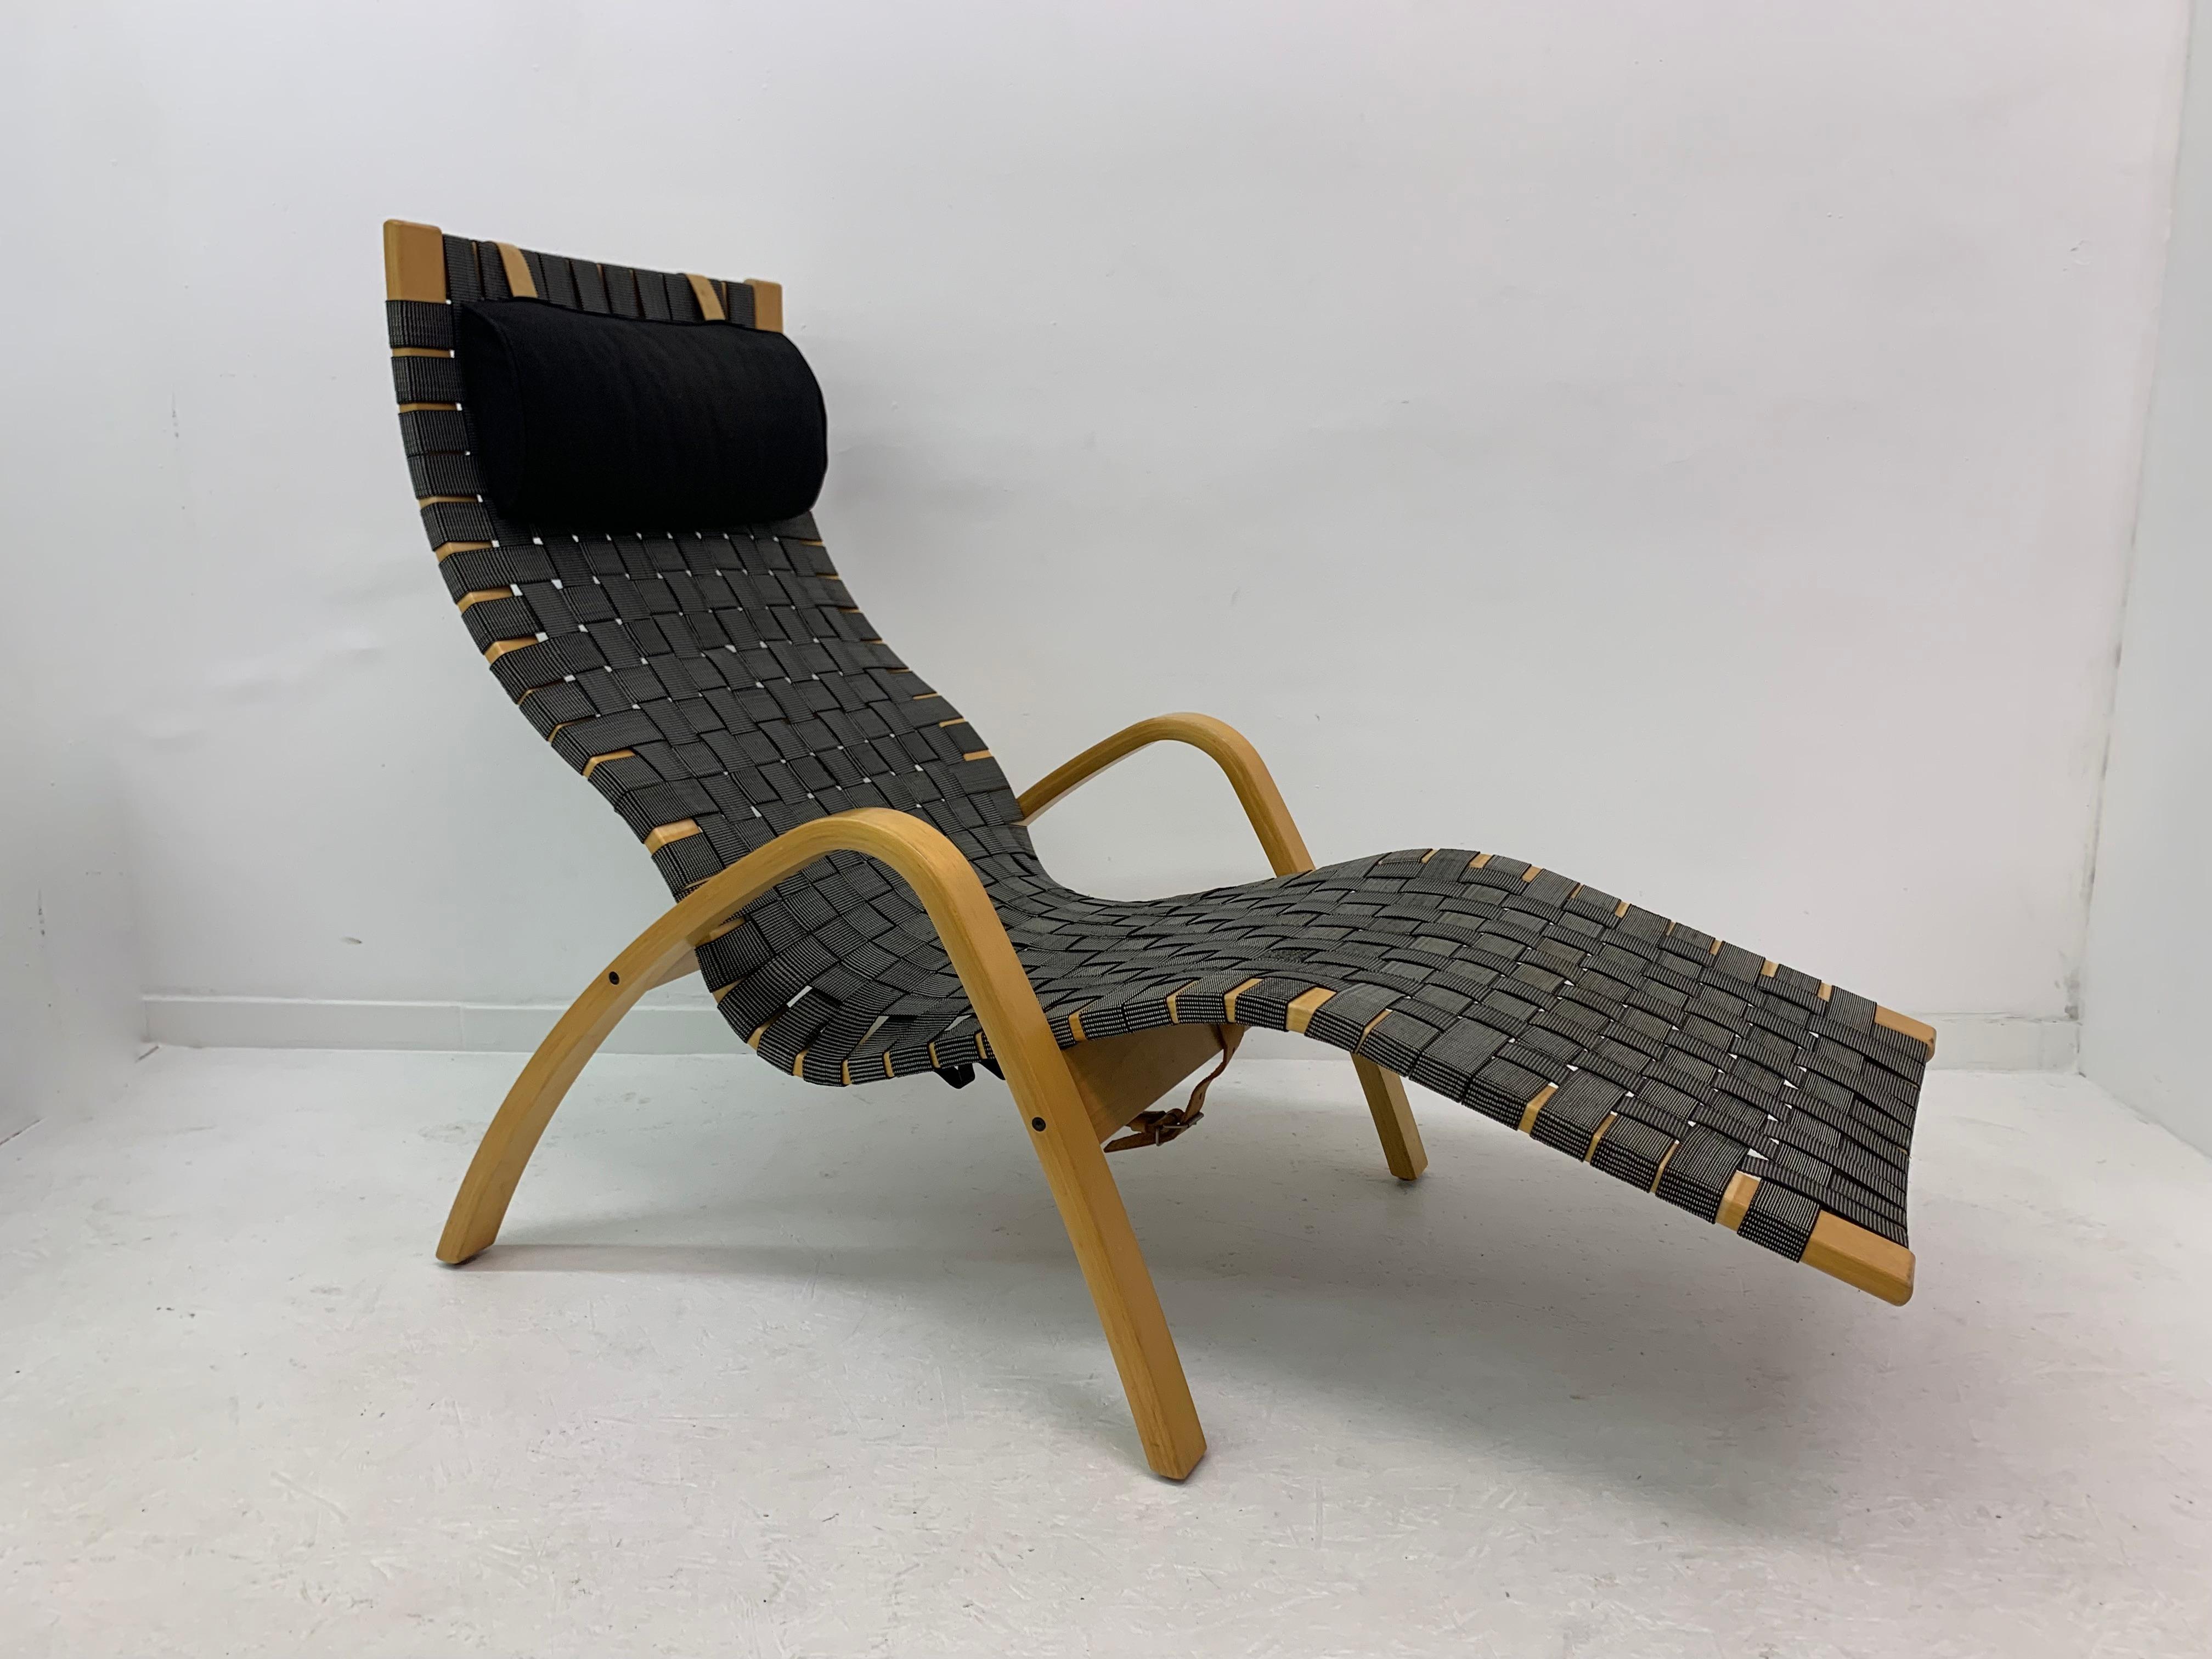 Vintage Ikea Chaise Lounge Chair by Kim Samson, 1990s For Sale 2